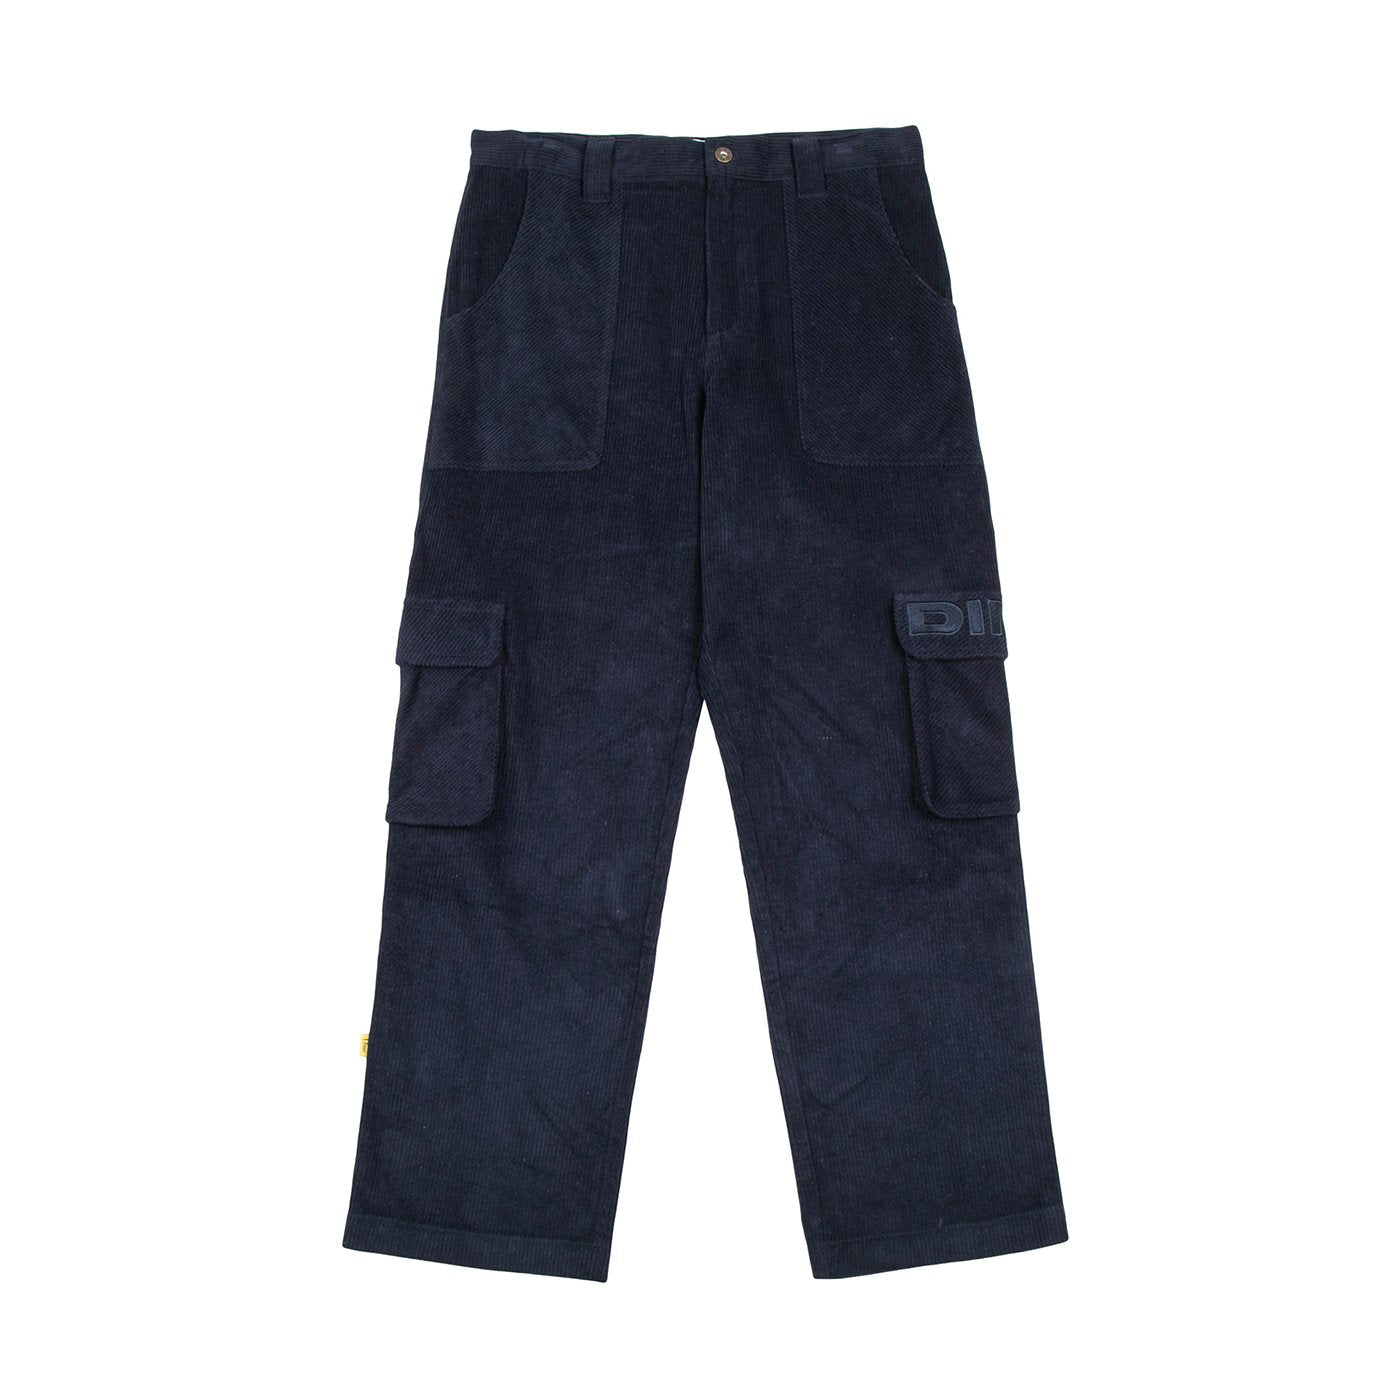 Corduroy Cargo Pants Nvy (size options listed)